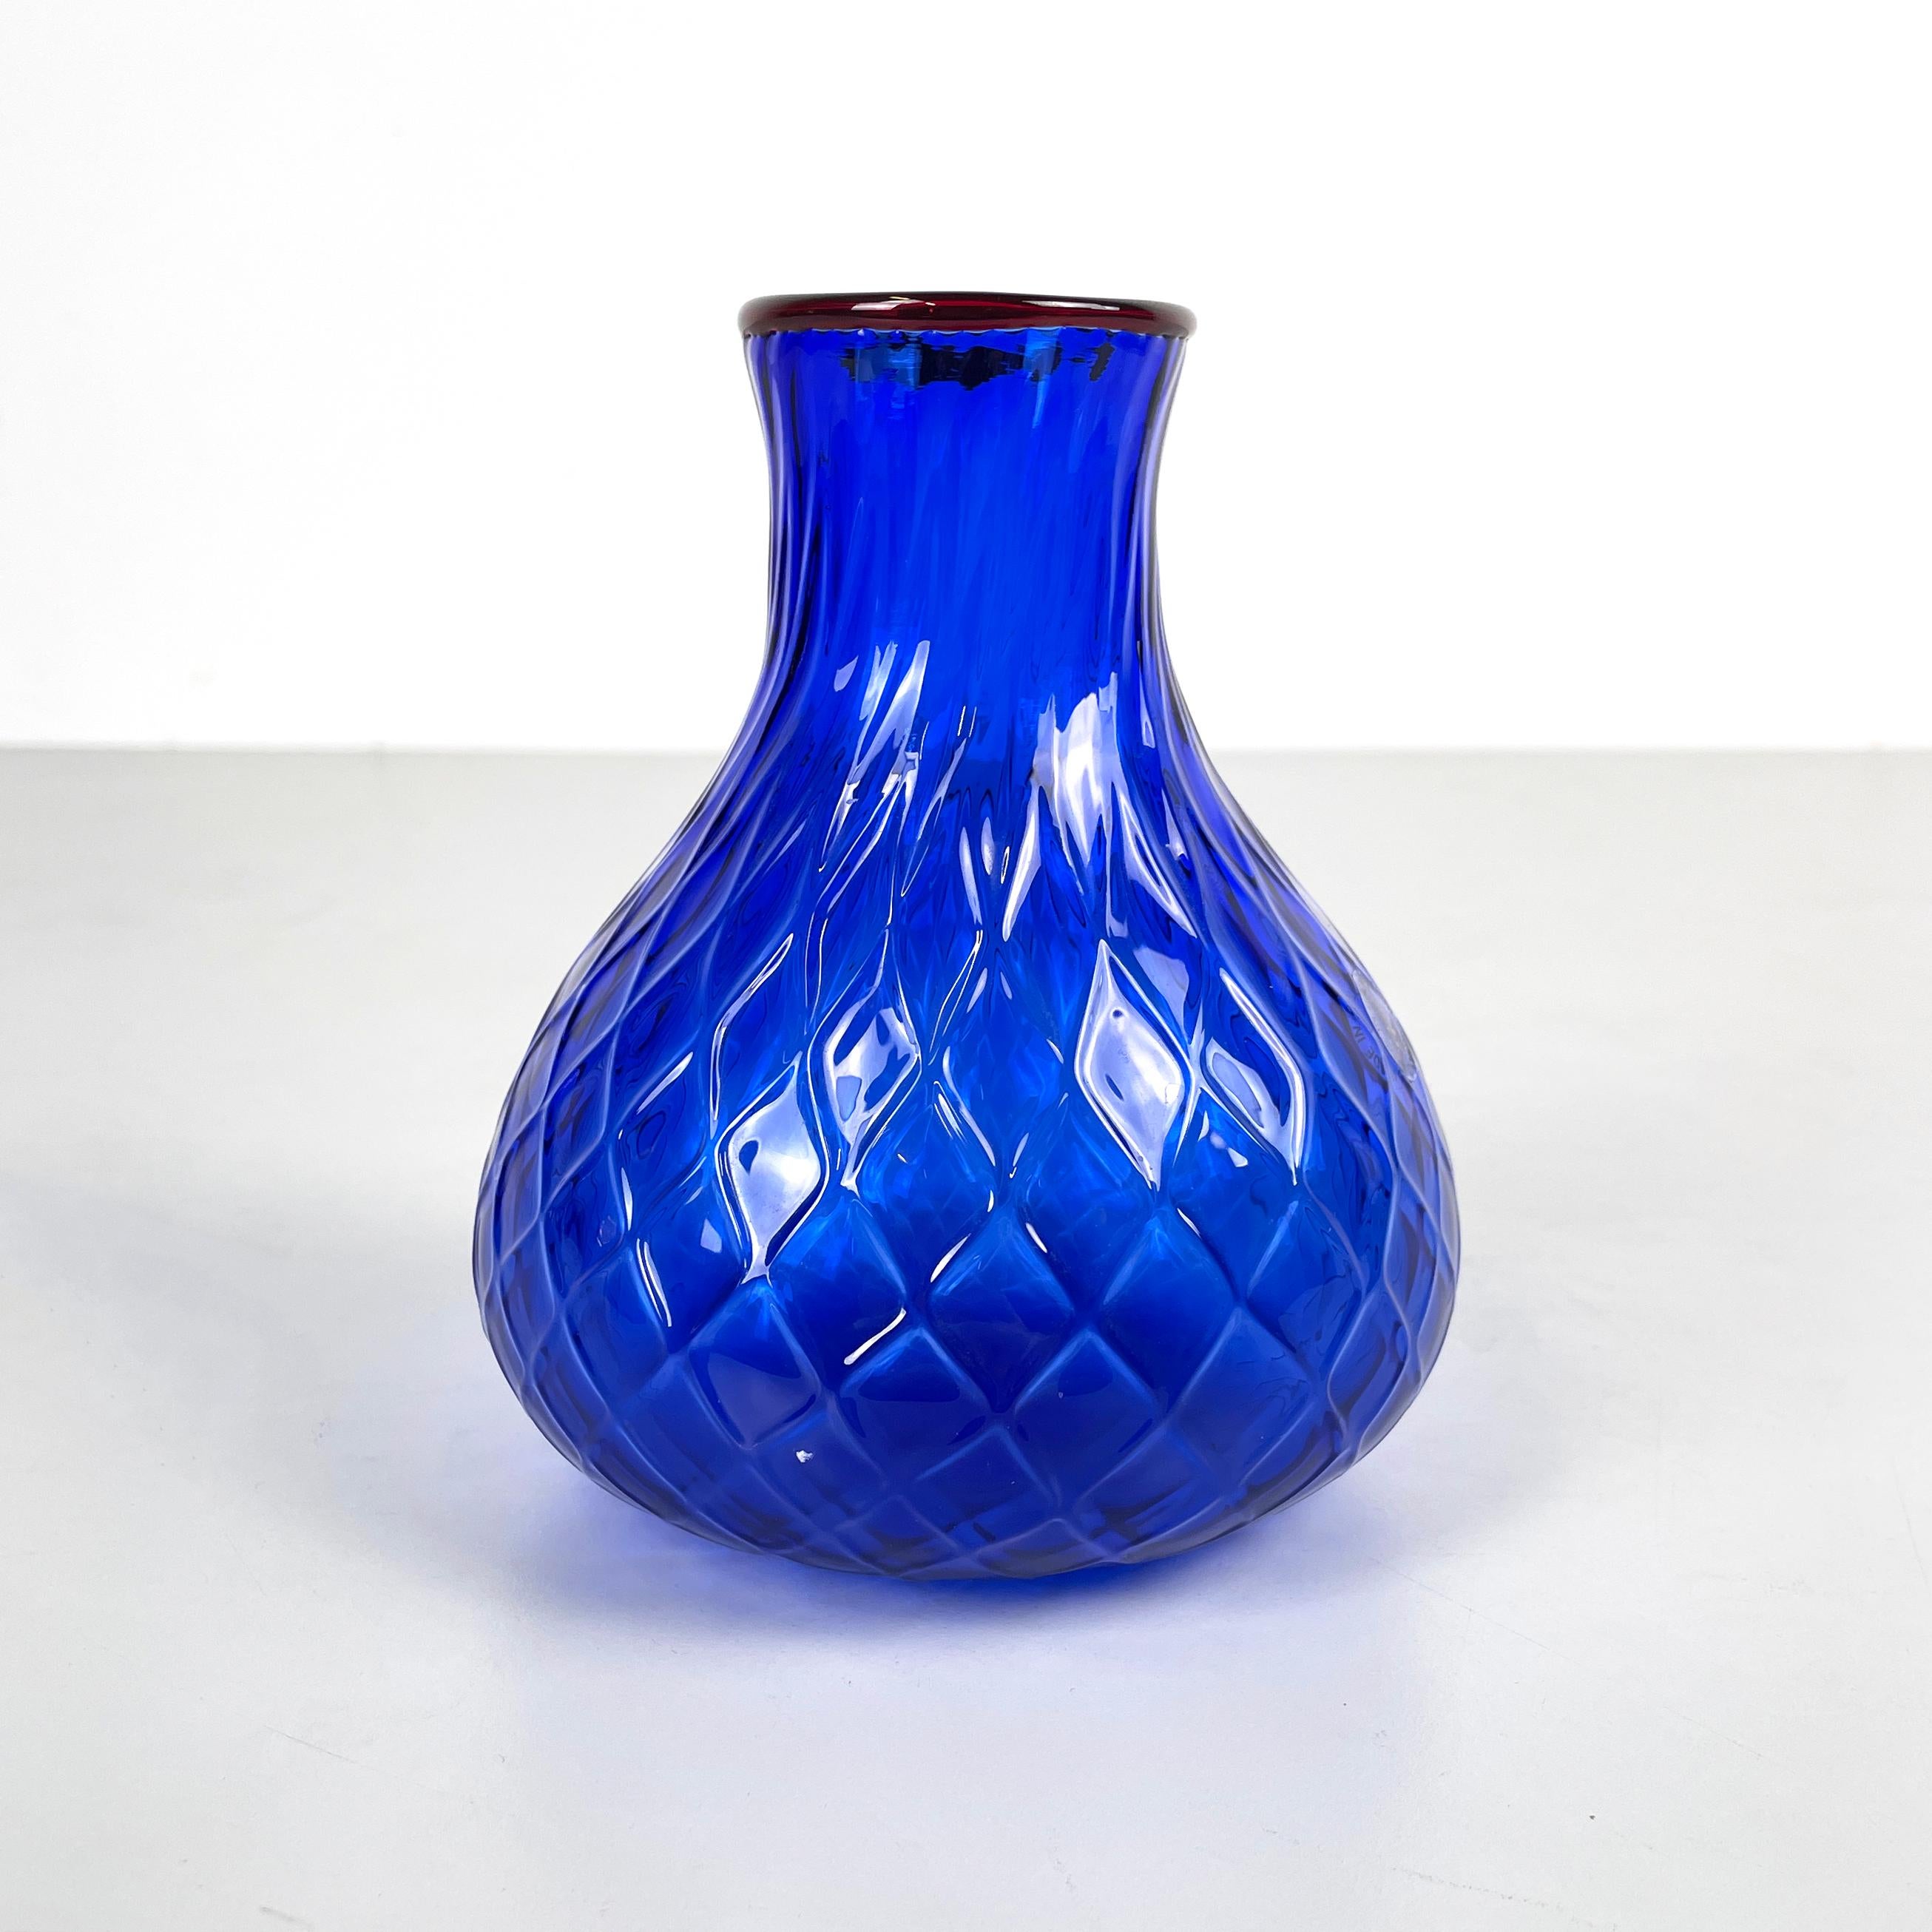 Italian modern Round vase in red and blue Murano glass by Venini 1990s
Fantastic and vintage round base vase in blue Murano glass, textured with rhombuses. In the upper part it has a round hole with a red glass profile. The structure widens in the